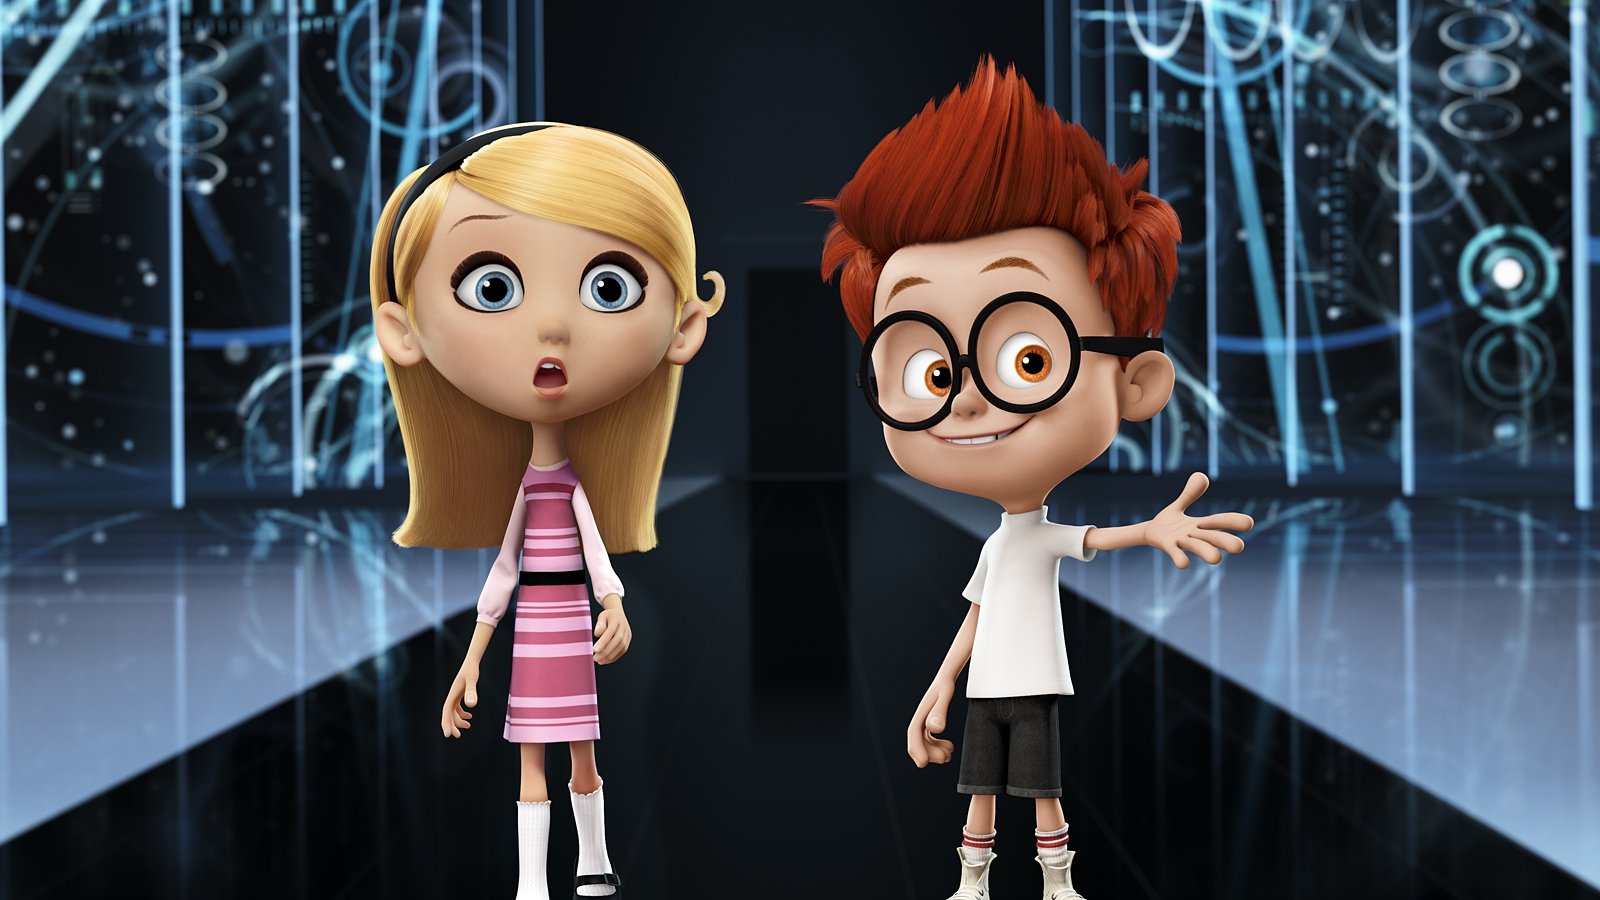 MR PEABODY AND SHERMAN animation adventure comedy family (61) wallpaper |  1920x1080 | 361191 | WallpaperUP